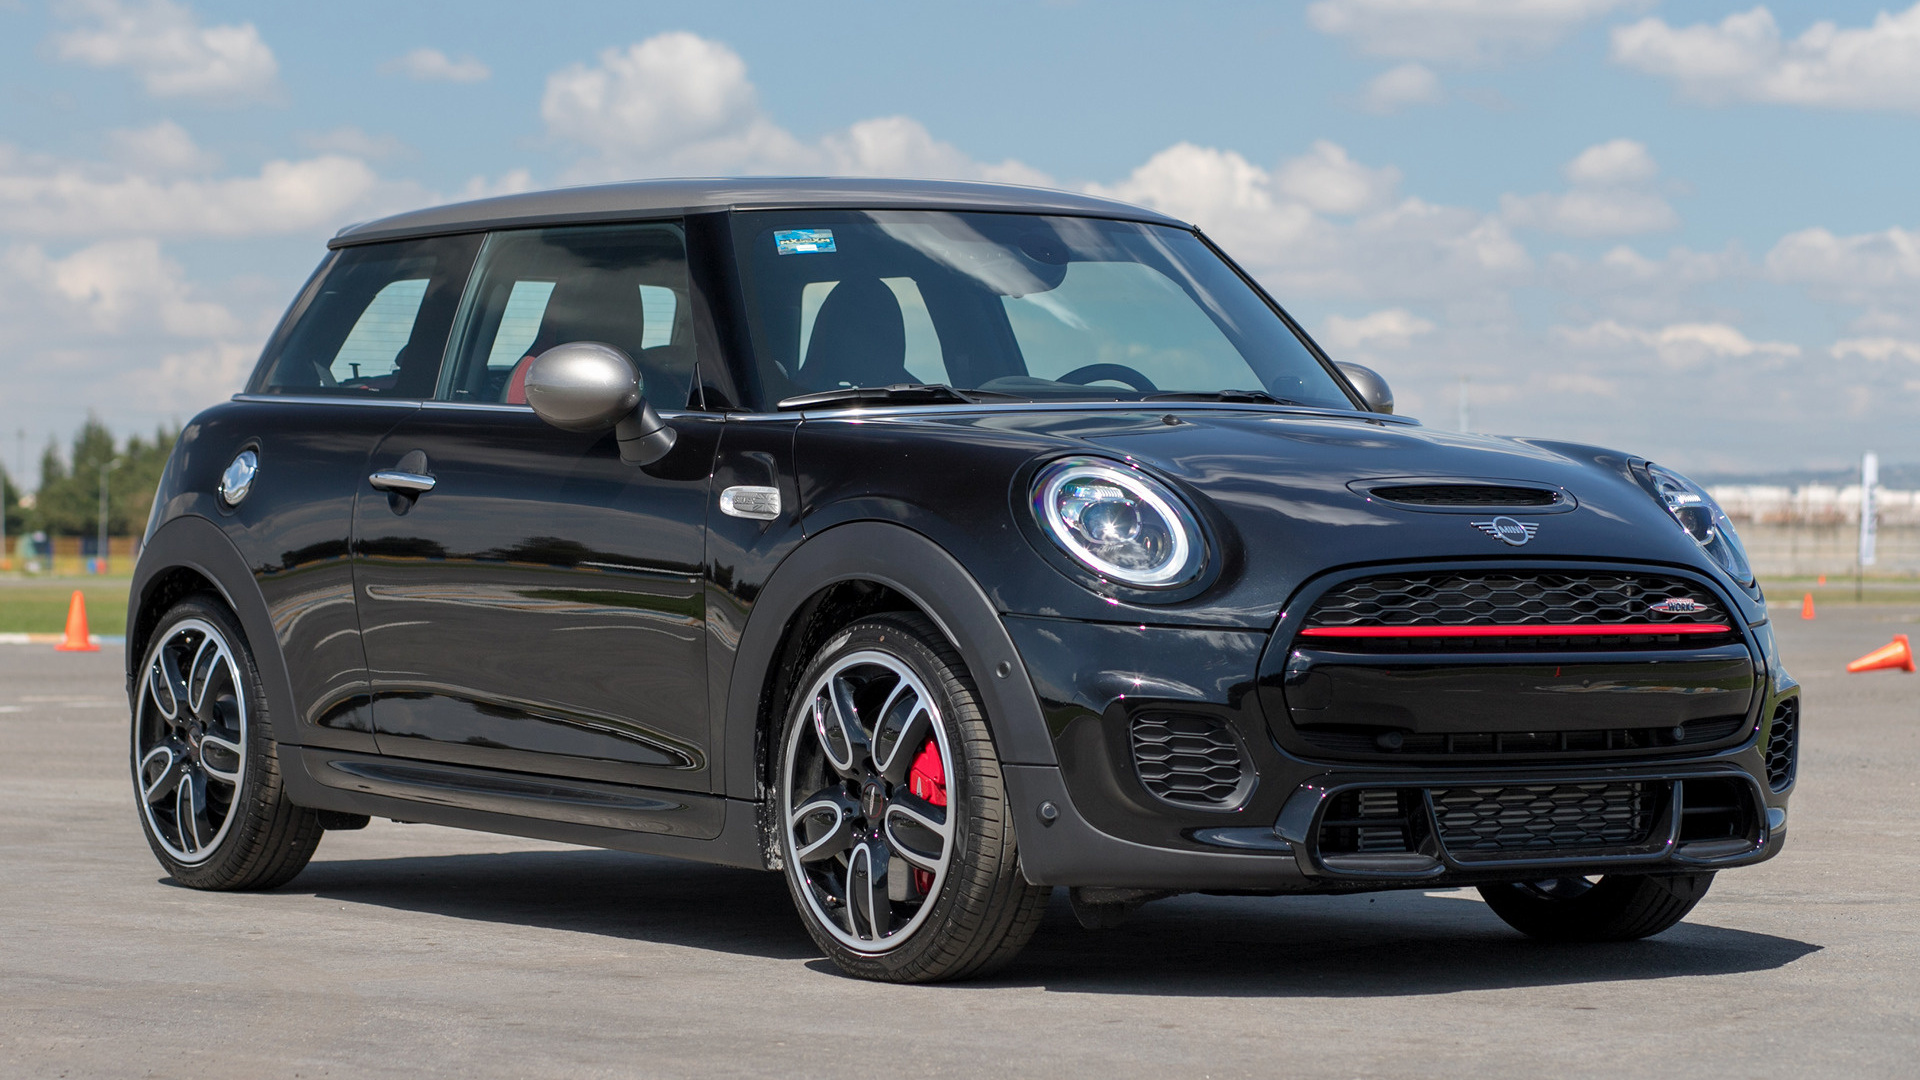 2018 Mini John Cooper Works Silver Edition 3-door (MX) - Wallpapers and ...